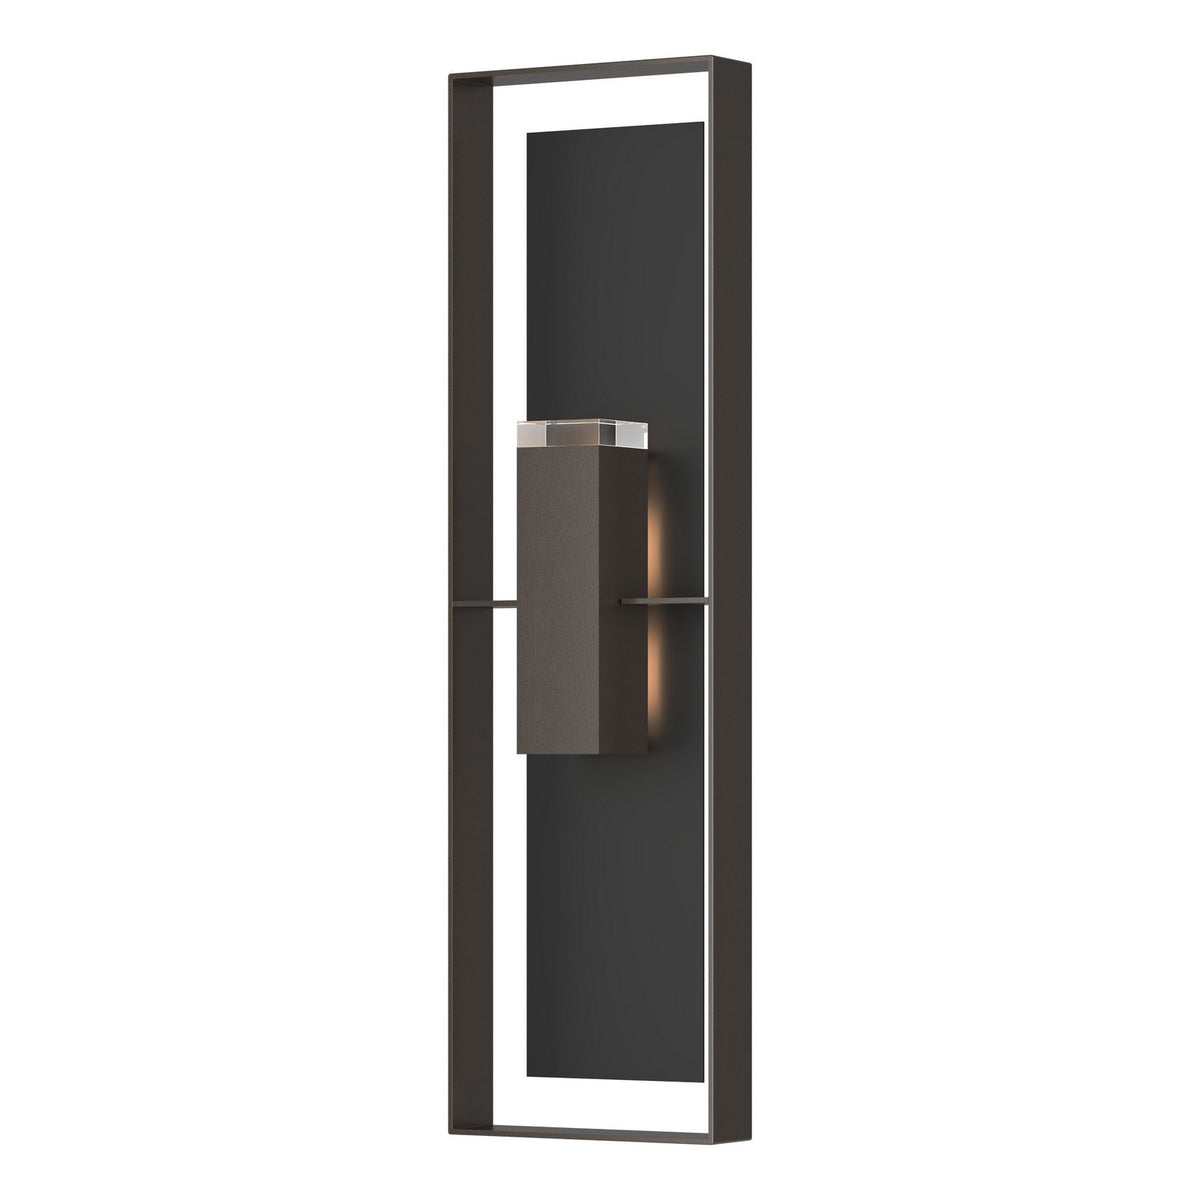 Hubbardton Forge - 302608-SKT-14-80-ZM0736 - Two Light Outdoor Wall Sconce - Shadow Box - Coastal Oil Rubbed Bronze